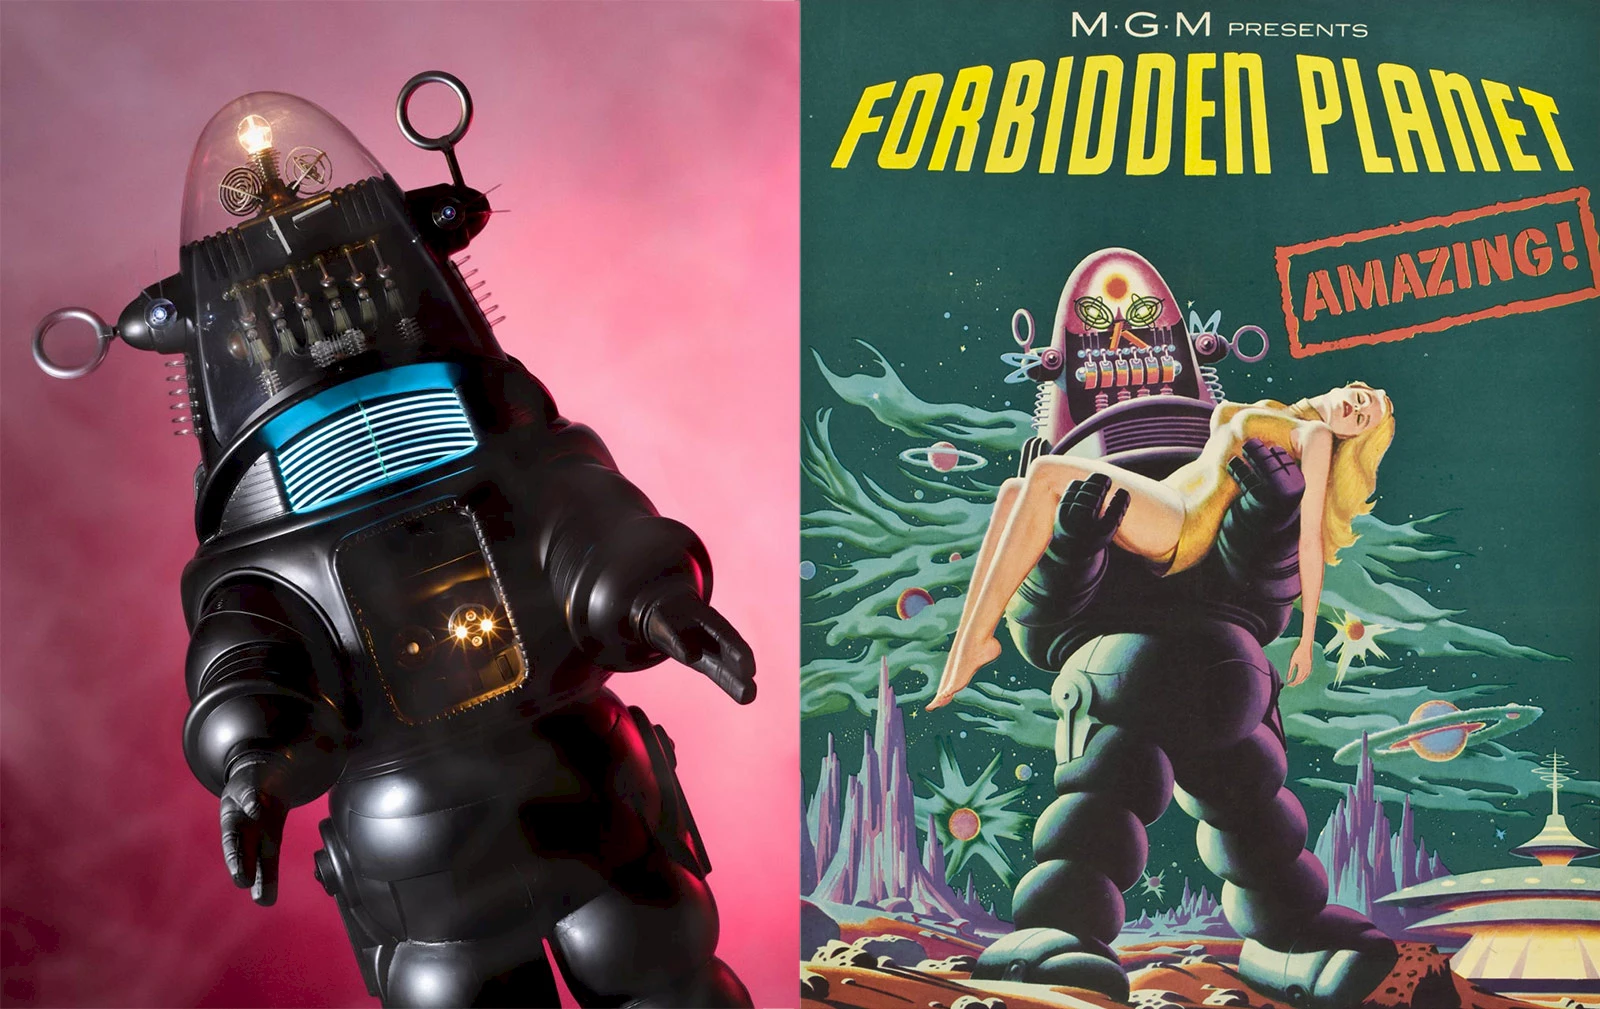 Robby the Robot and the original film poster.